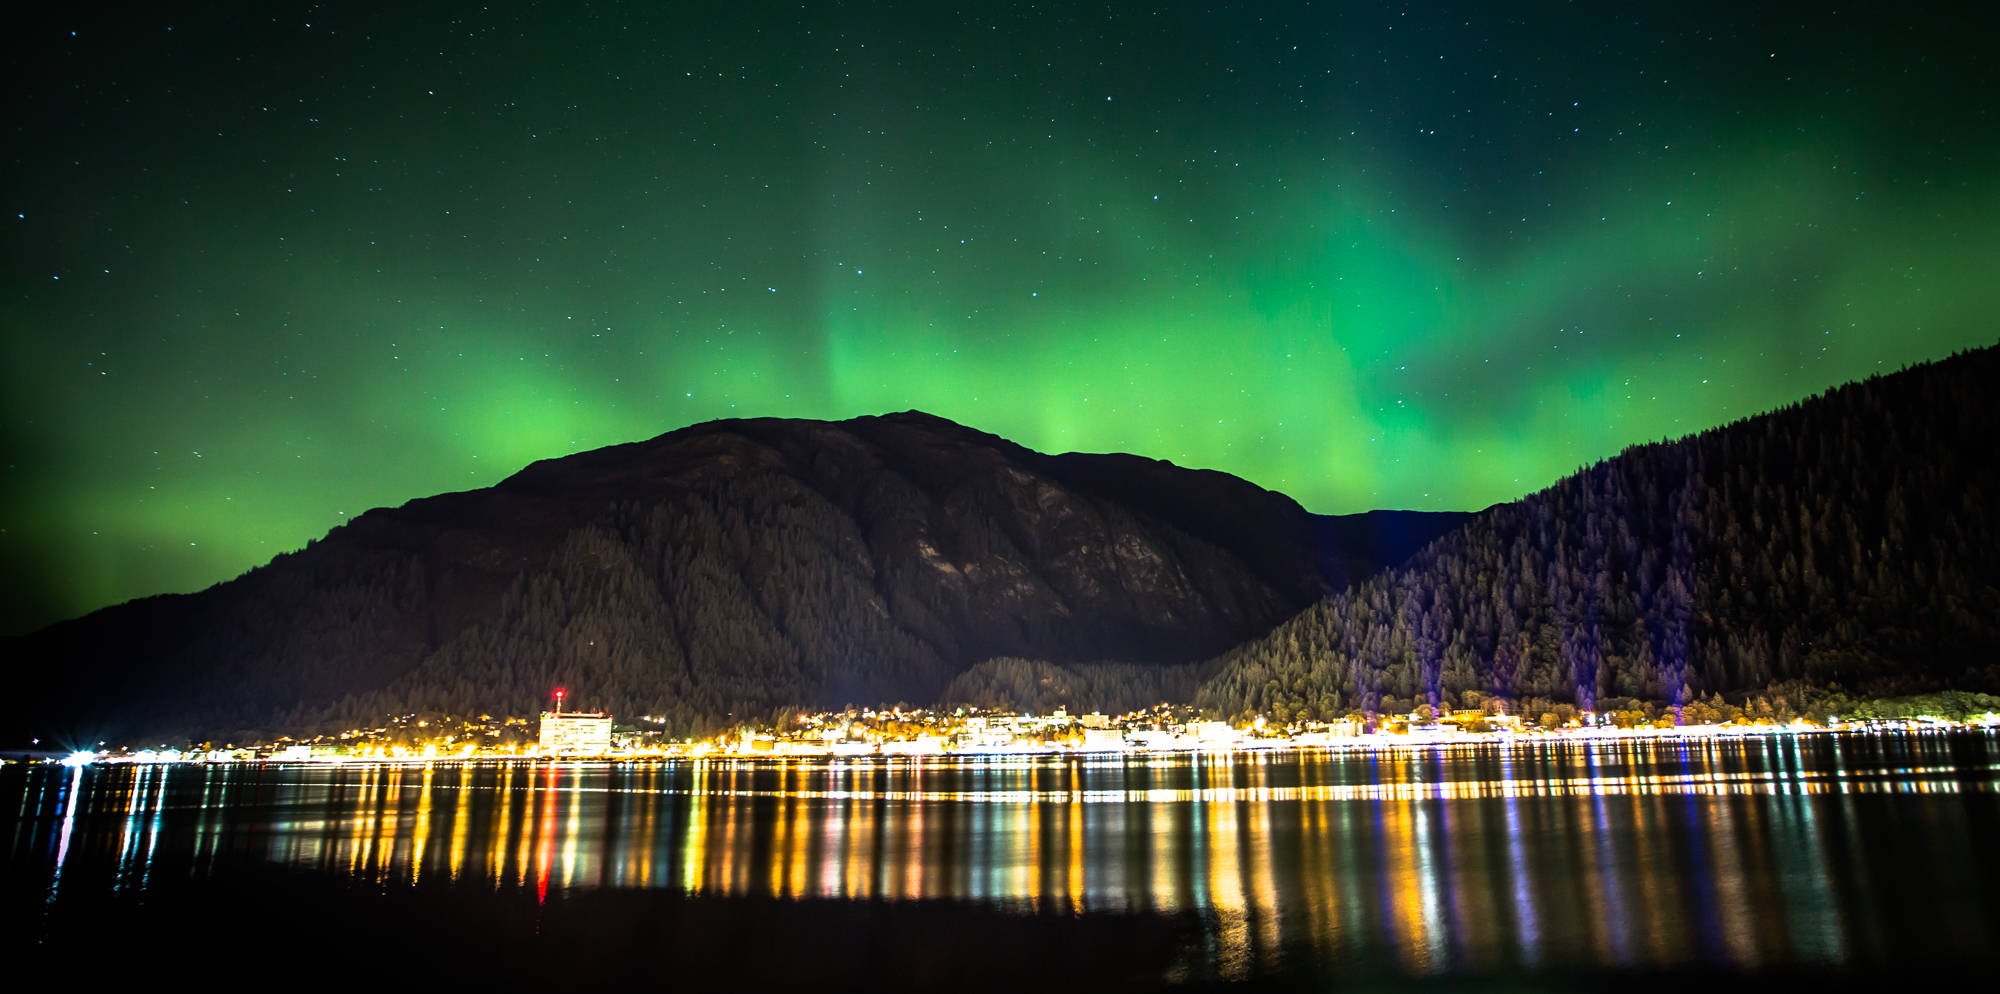 Northern lights over Juneau, on the night of Oct. 8, 2018. (Courtsey Photo | Jack Beedle)